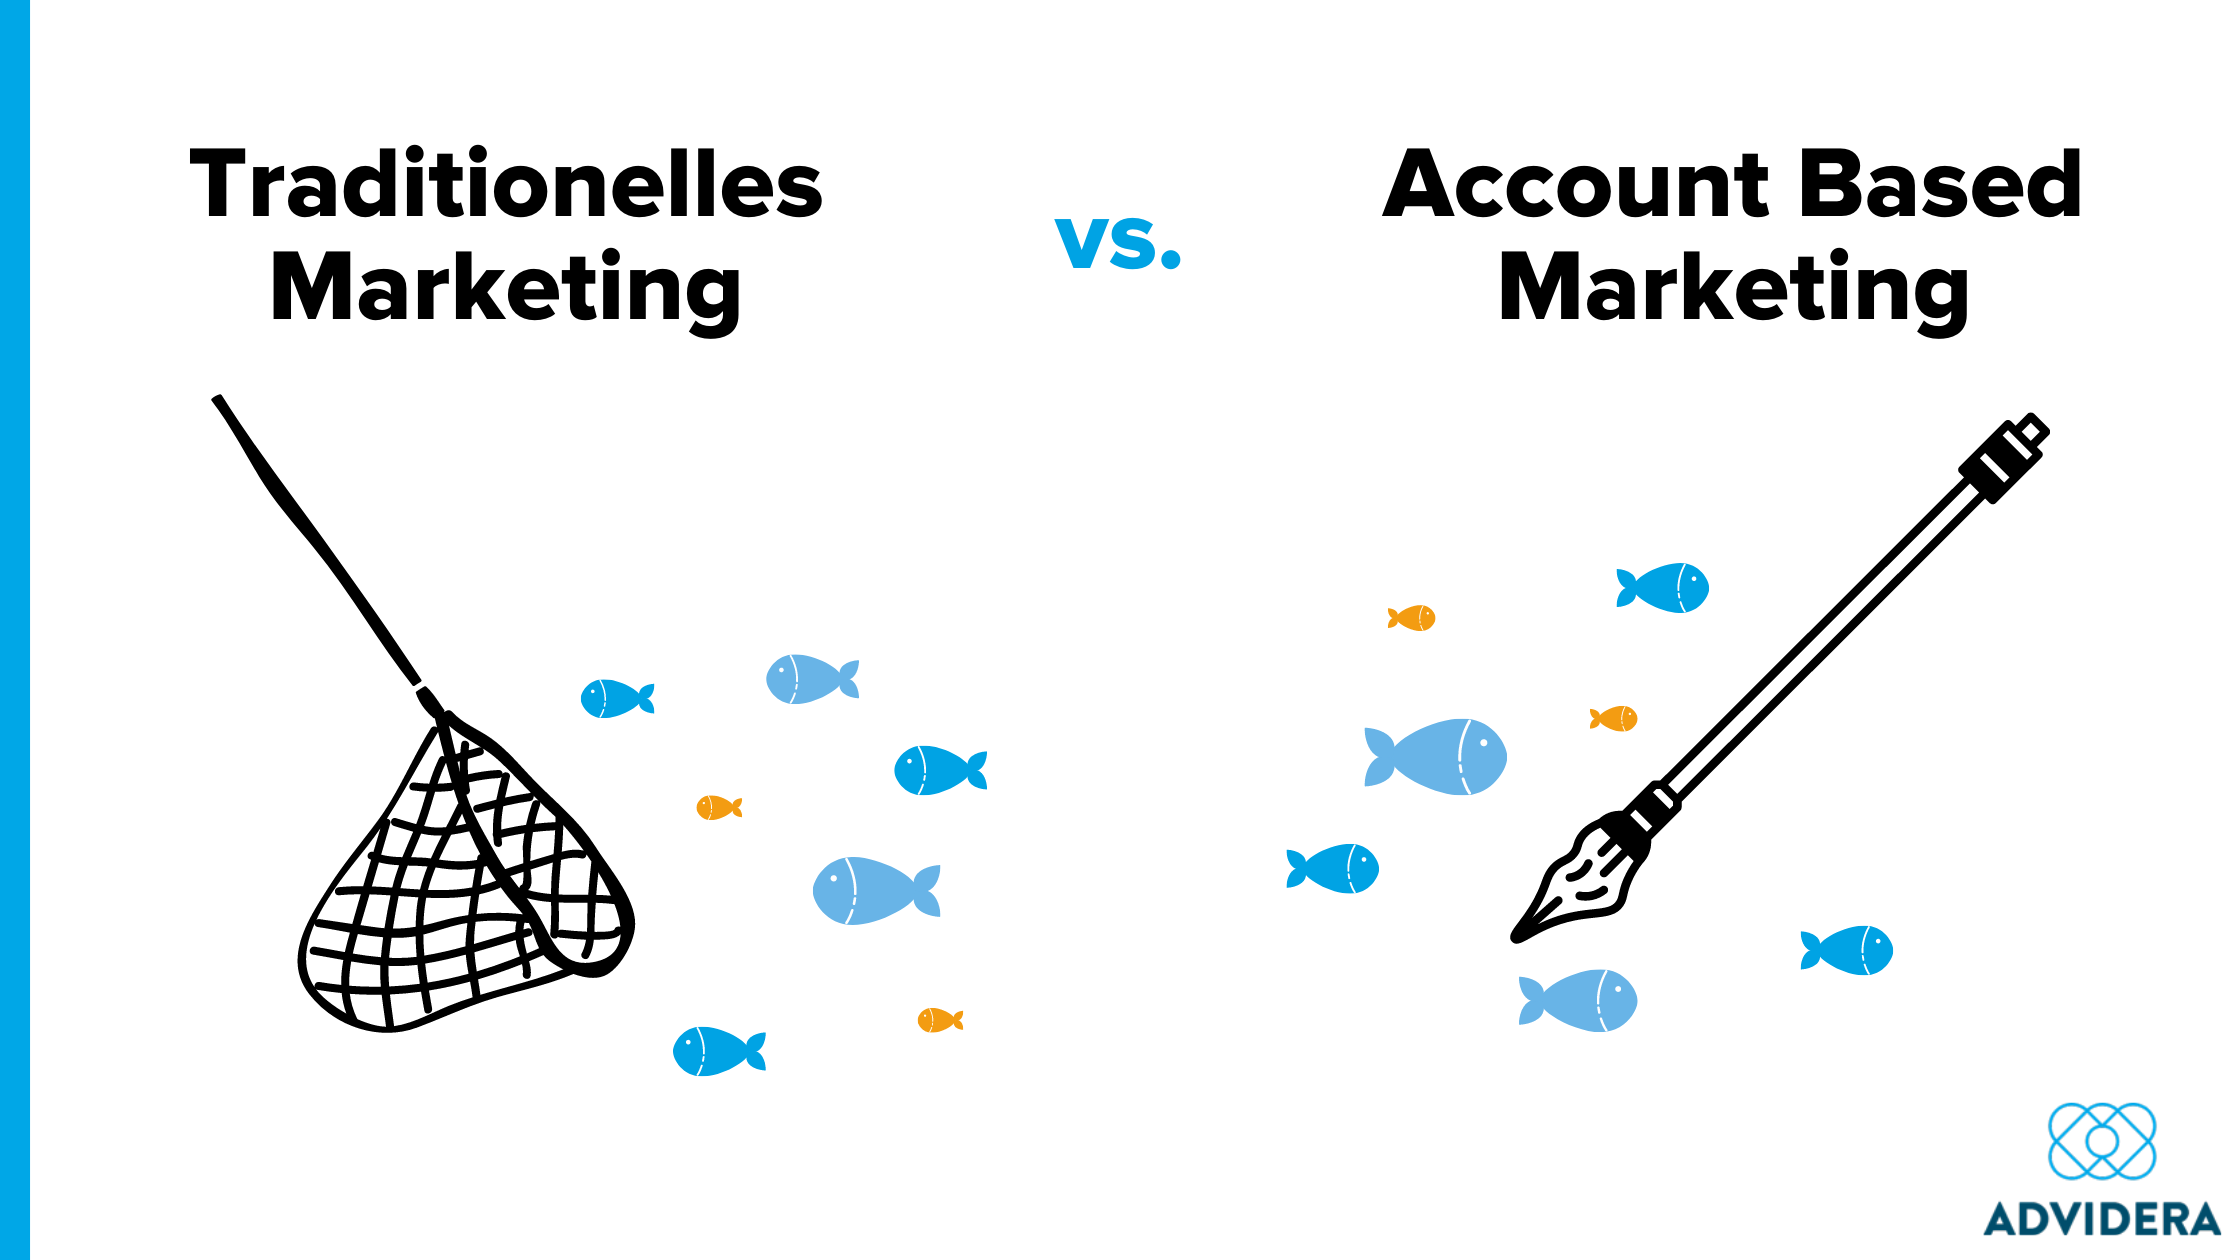 Account Based Marketing vs. Traditionelles Marketing